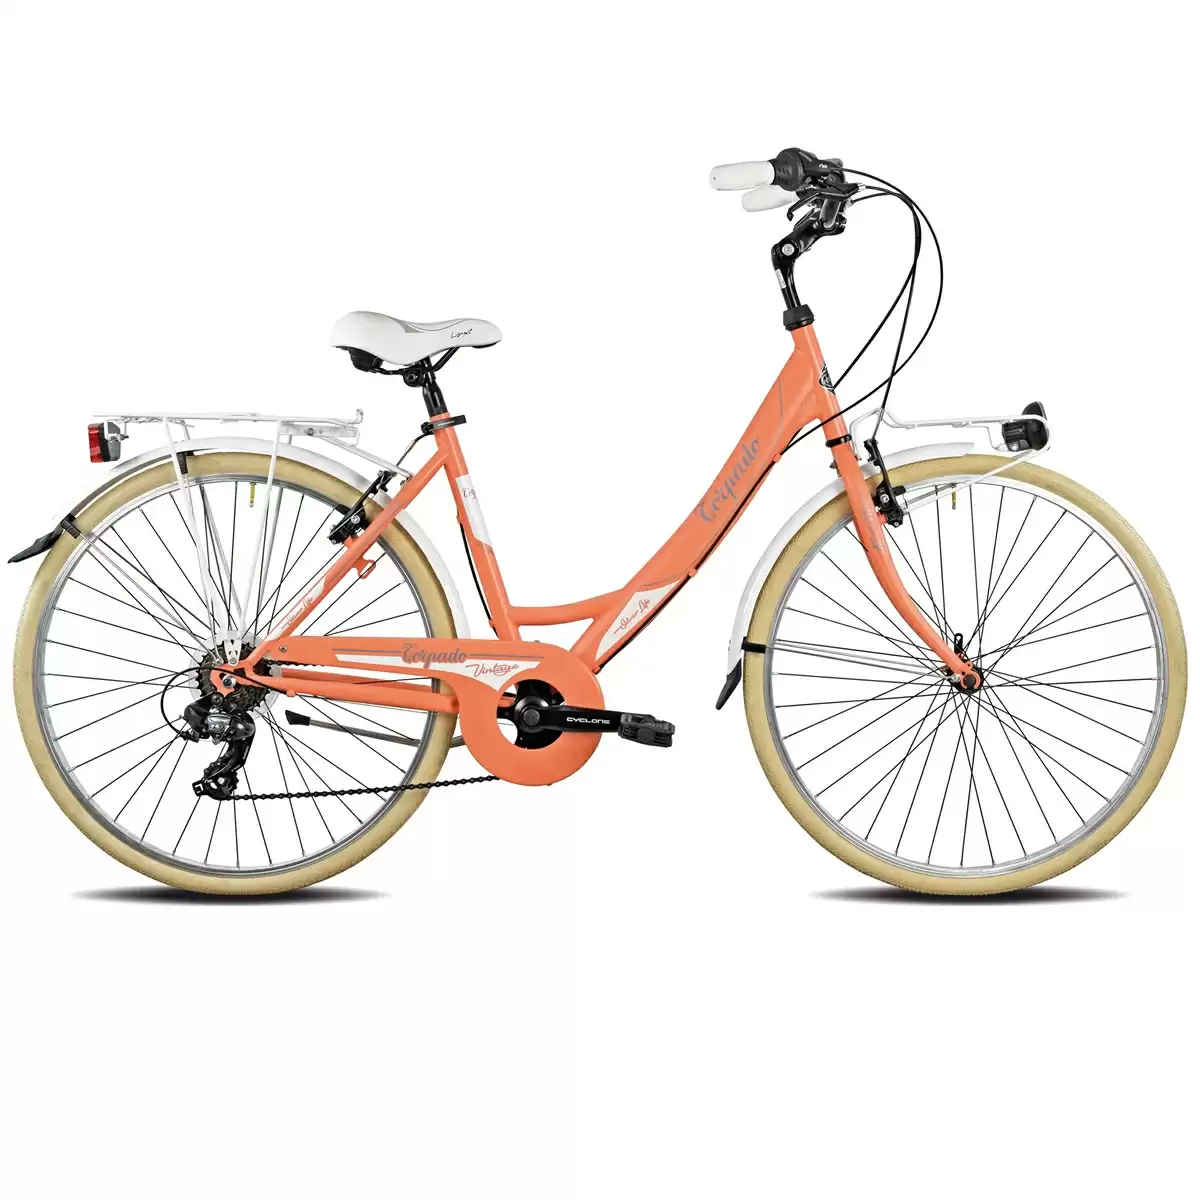 bicycle city T120 silverlife 26'' lady steel 6 speed Peach - image